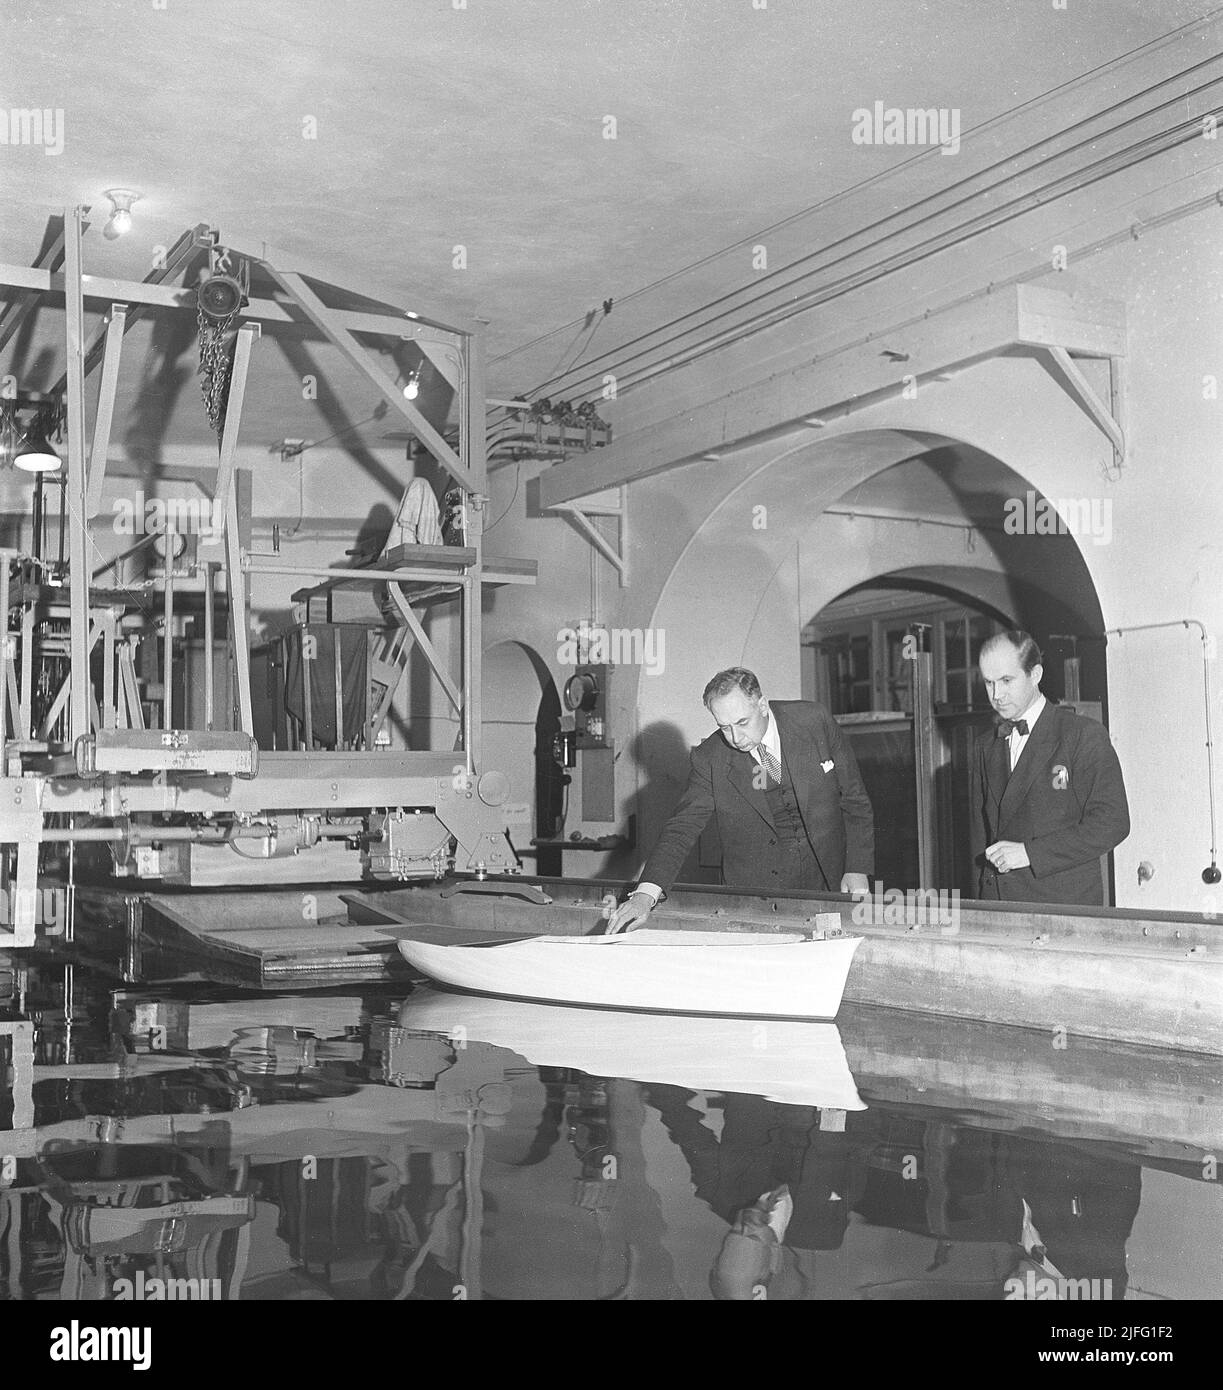 Ship engineering in the 1940s. A test is conducted of a shipmodel to simulate how it performs in the water, if the ship hull is of a good design or not. The test is among the first steps in shipbuilding and the results affects the safety, design, economics and overall performance of the ship to be built.  Sweden 1949 Kristoffersson ref AU51-3 Stock Photo